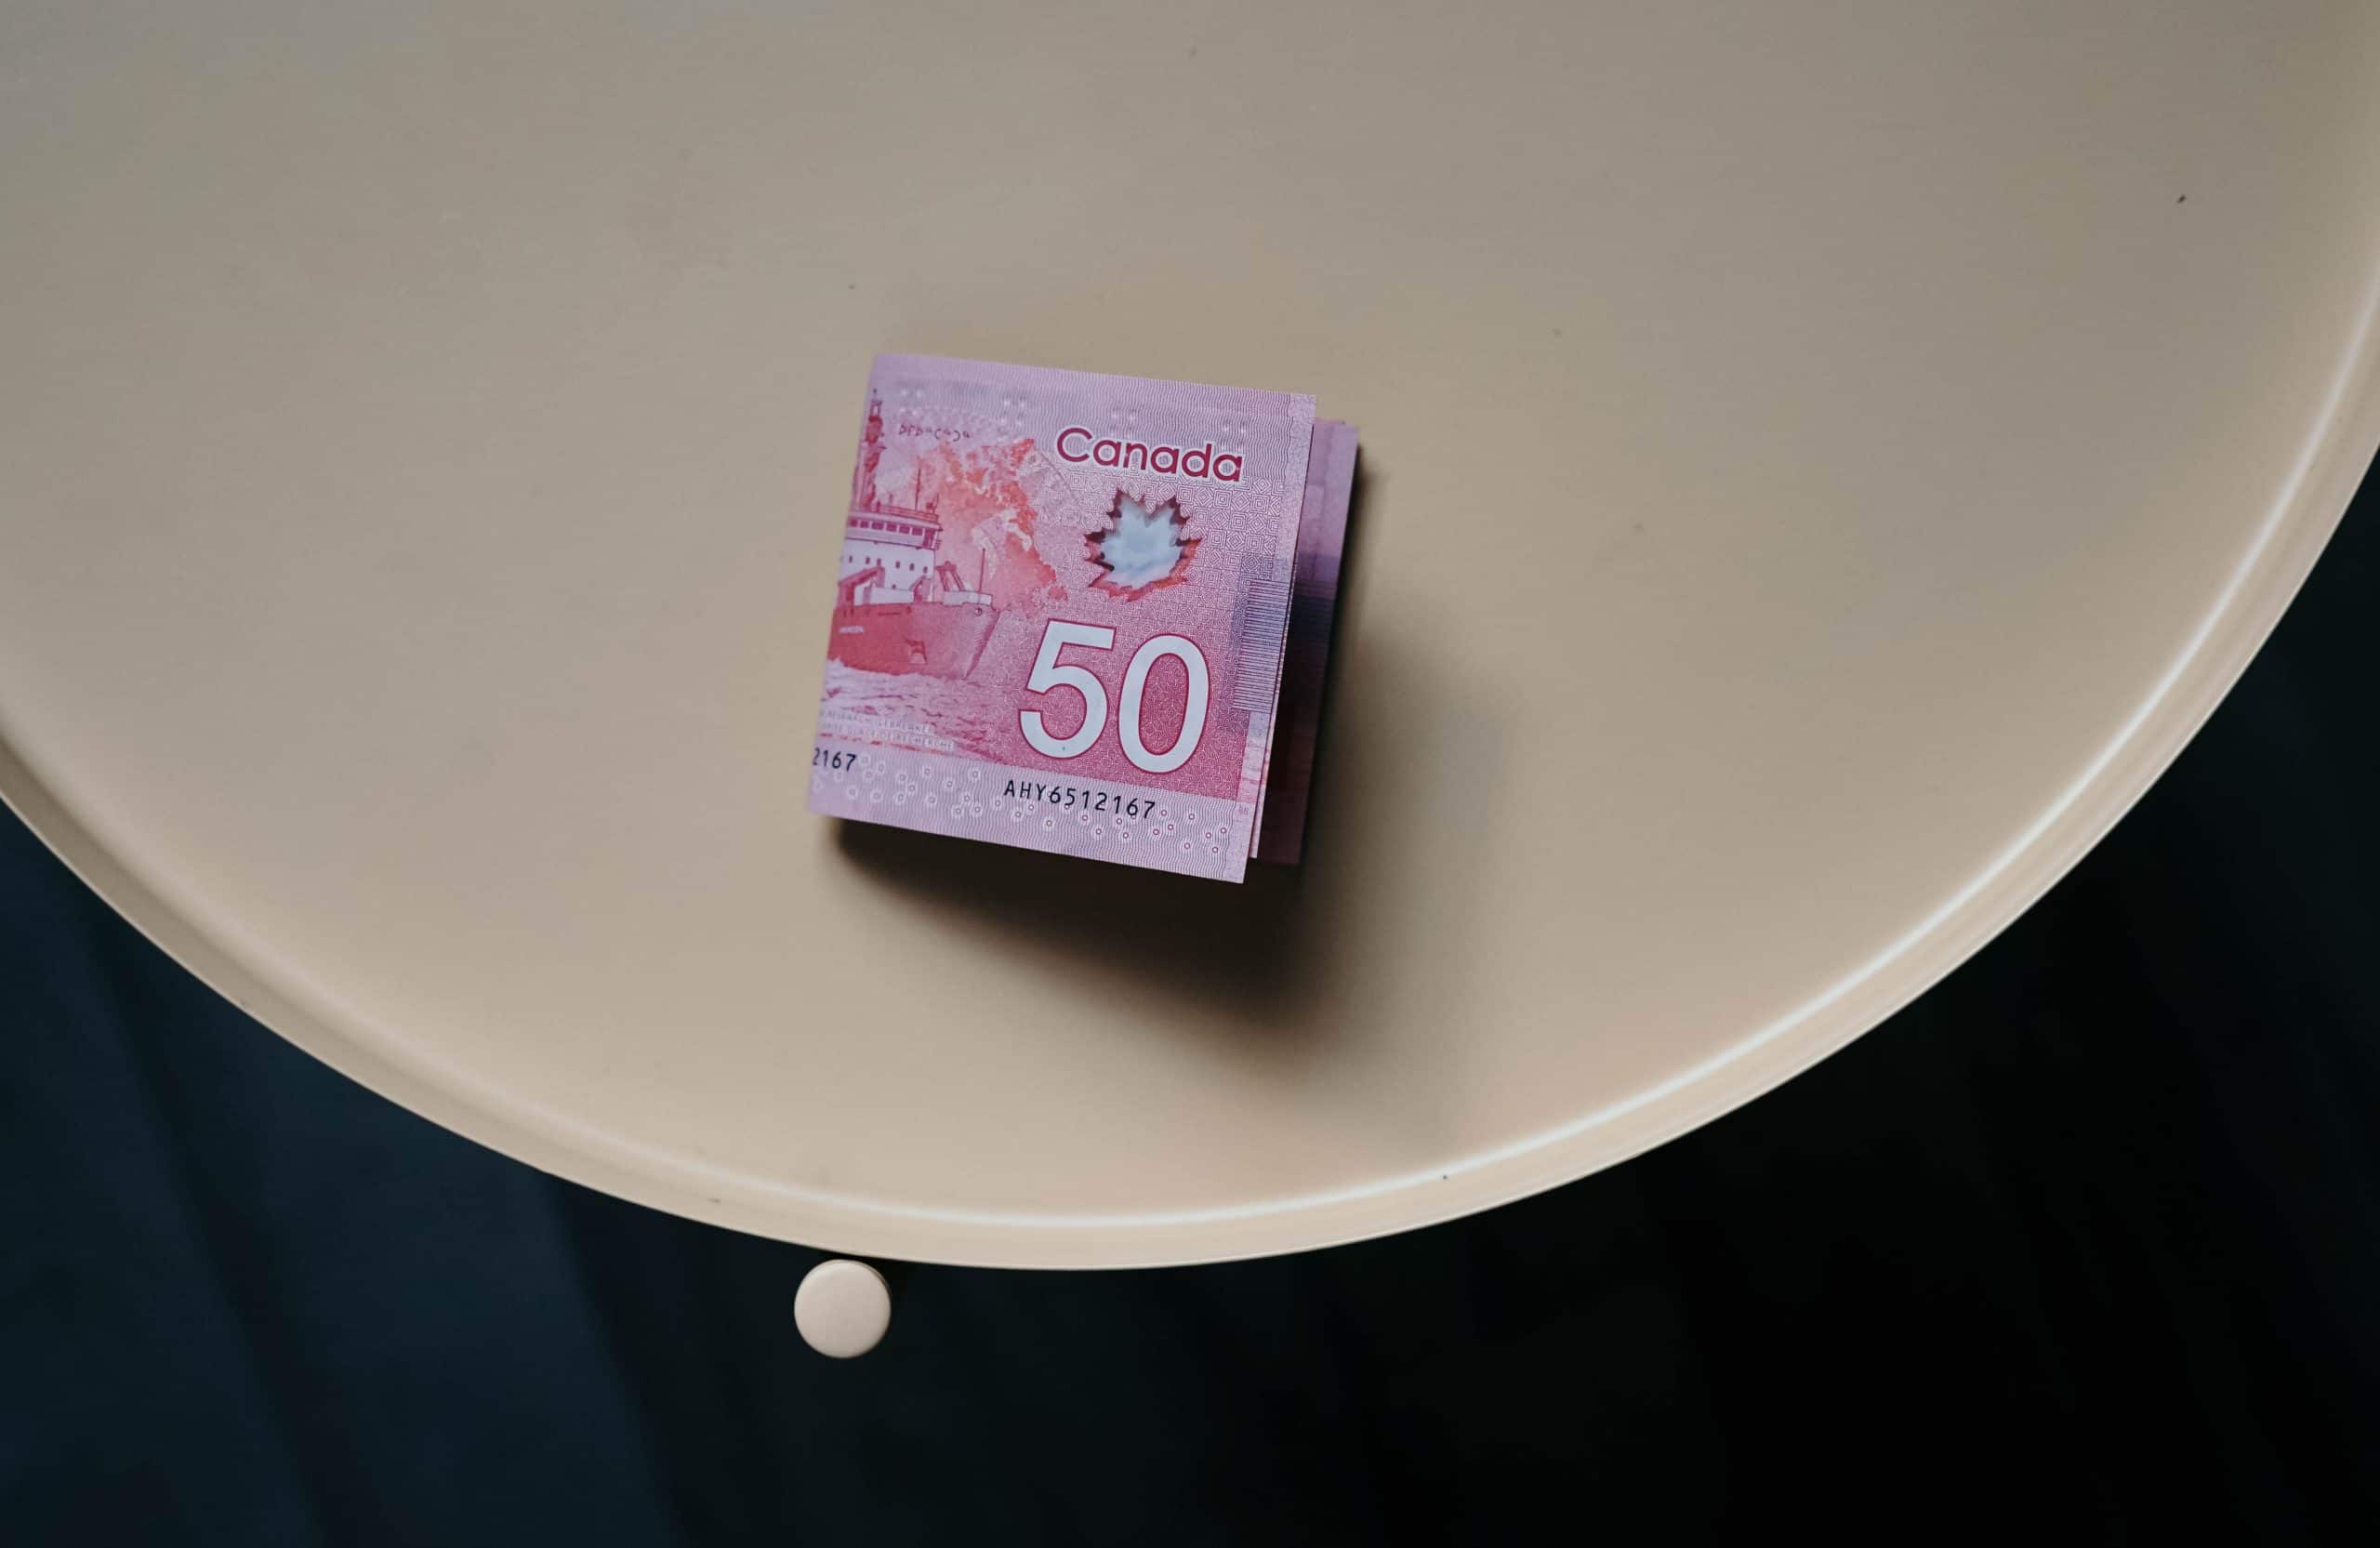 An image of a fifty dollar bill on a table